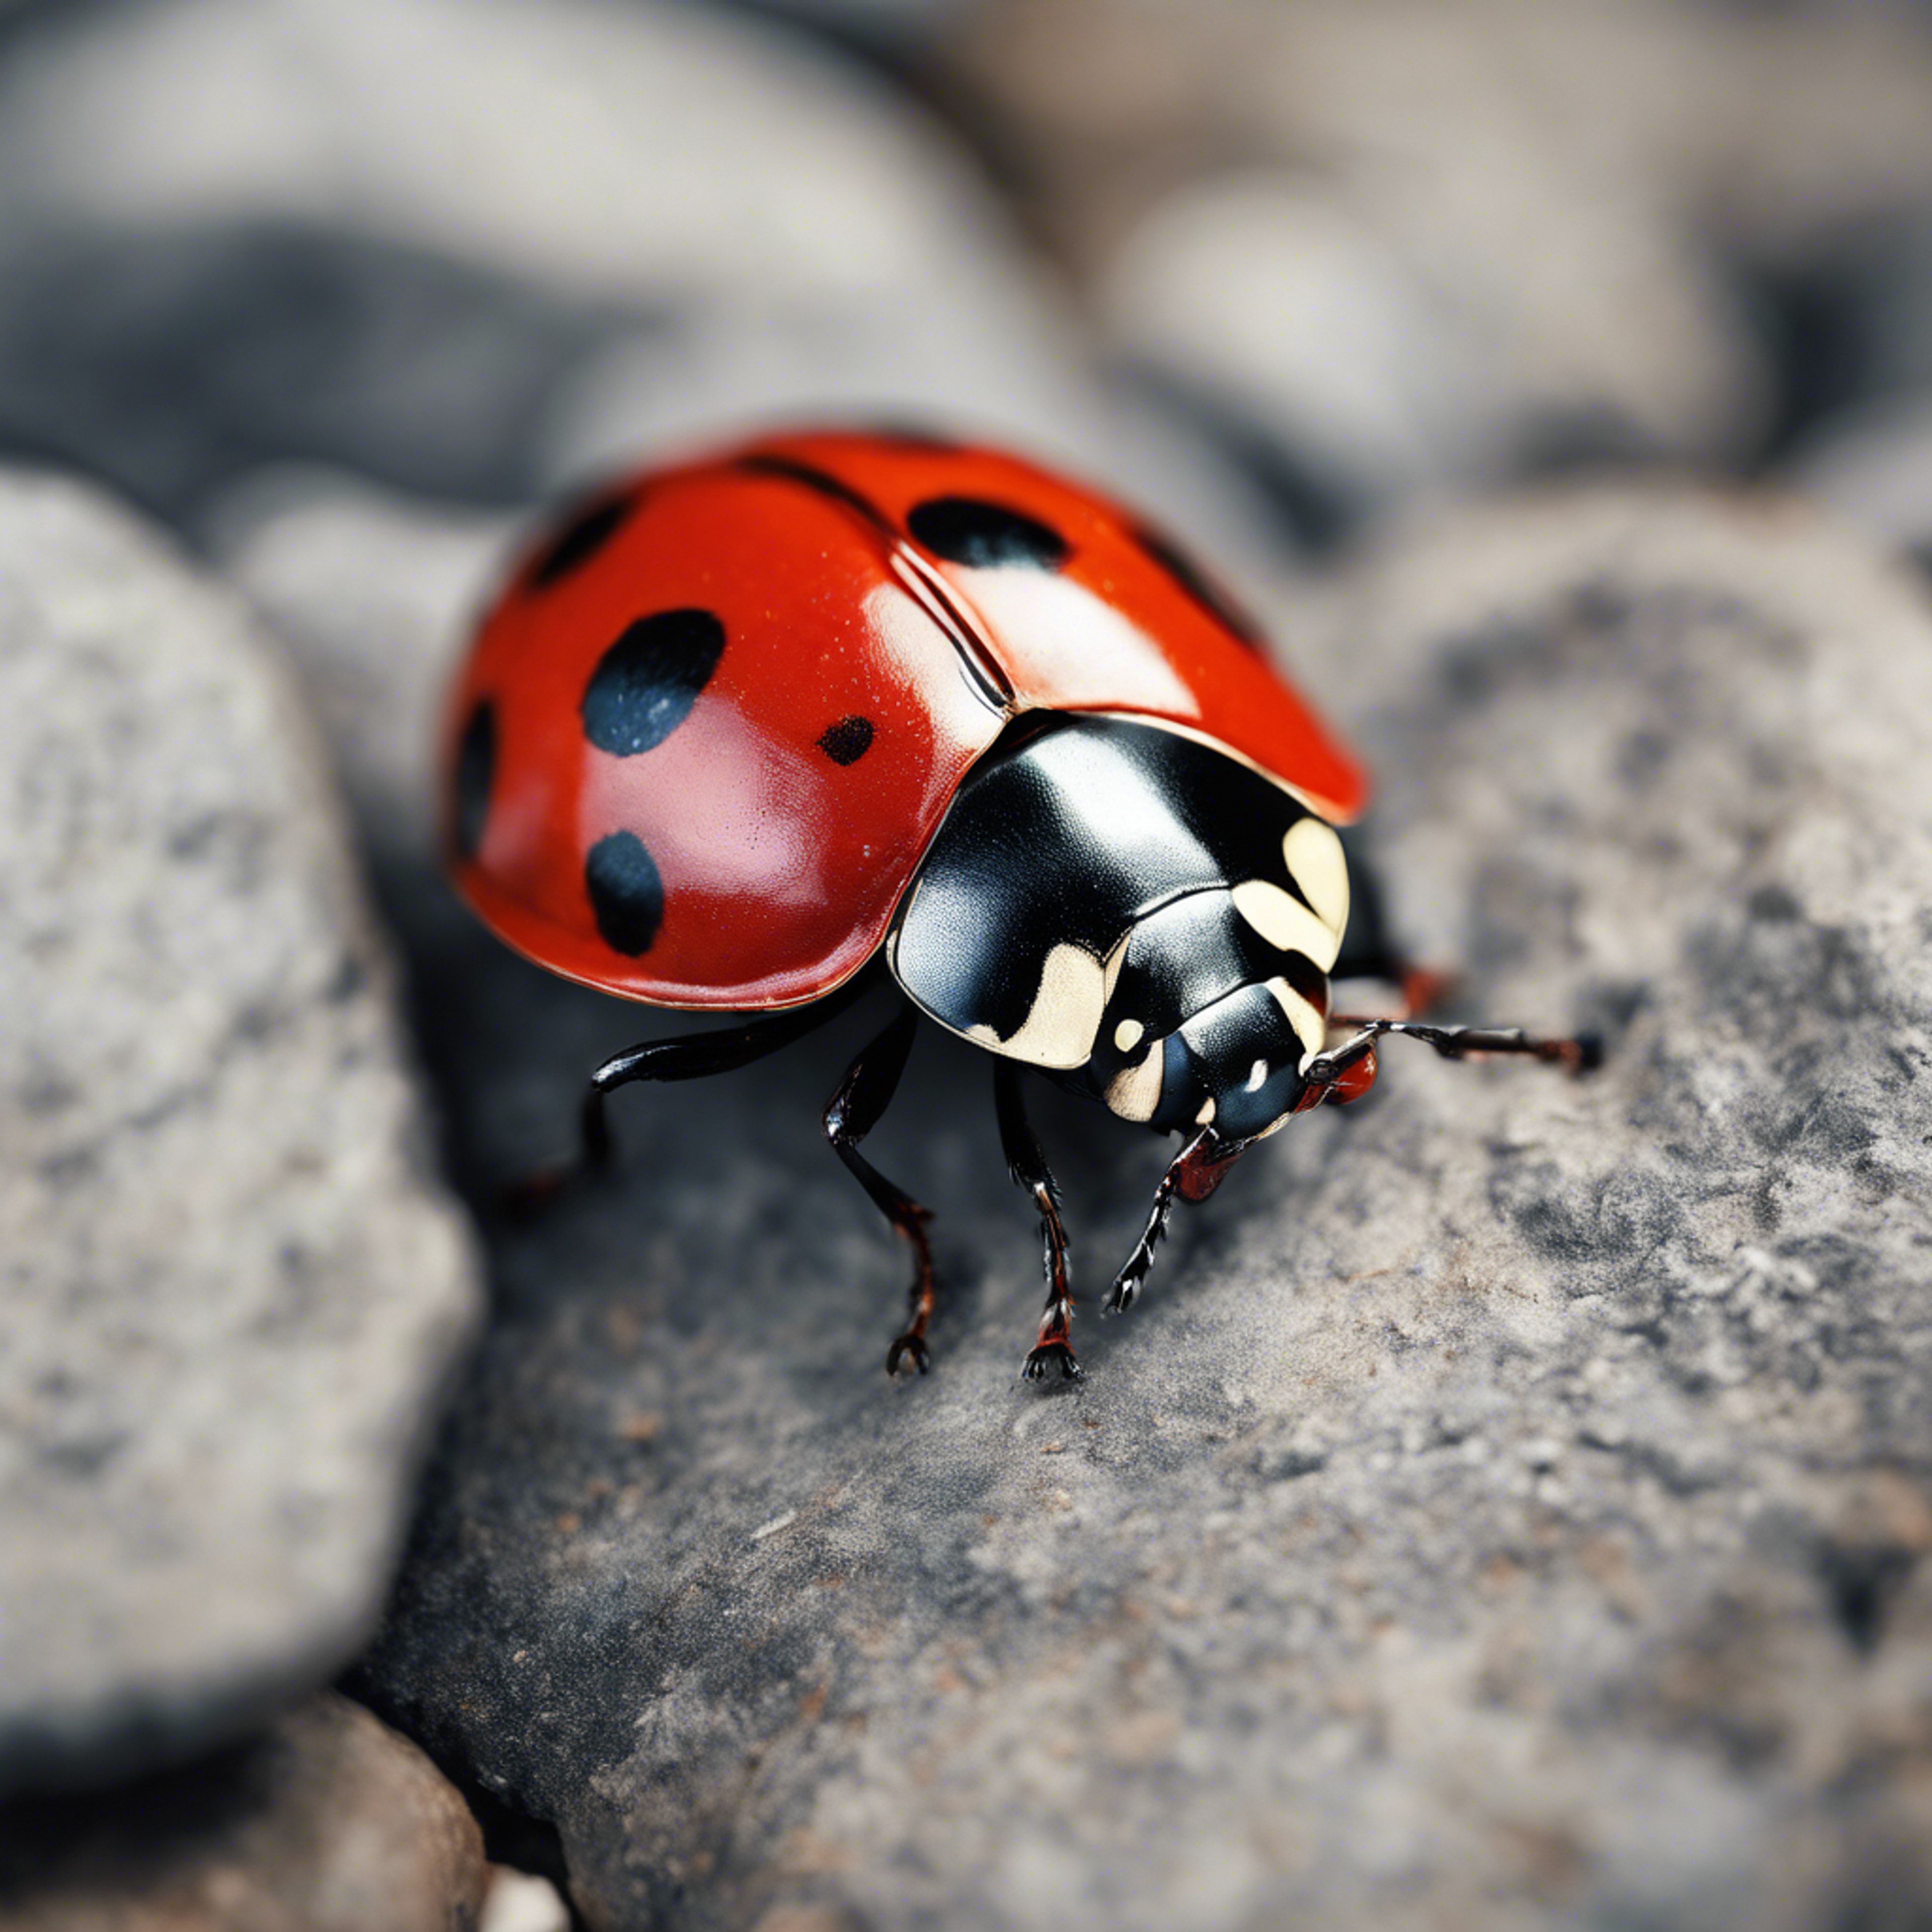 A fearless ladybug with bright red wings crawling over a dull, grey stone. Tapet[cb02e673ce6f479eab40]